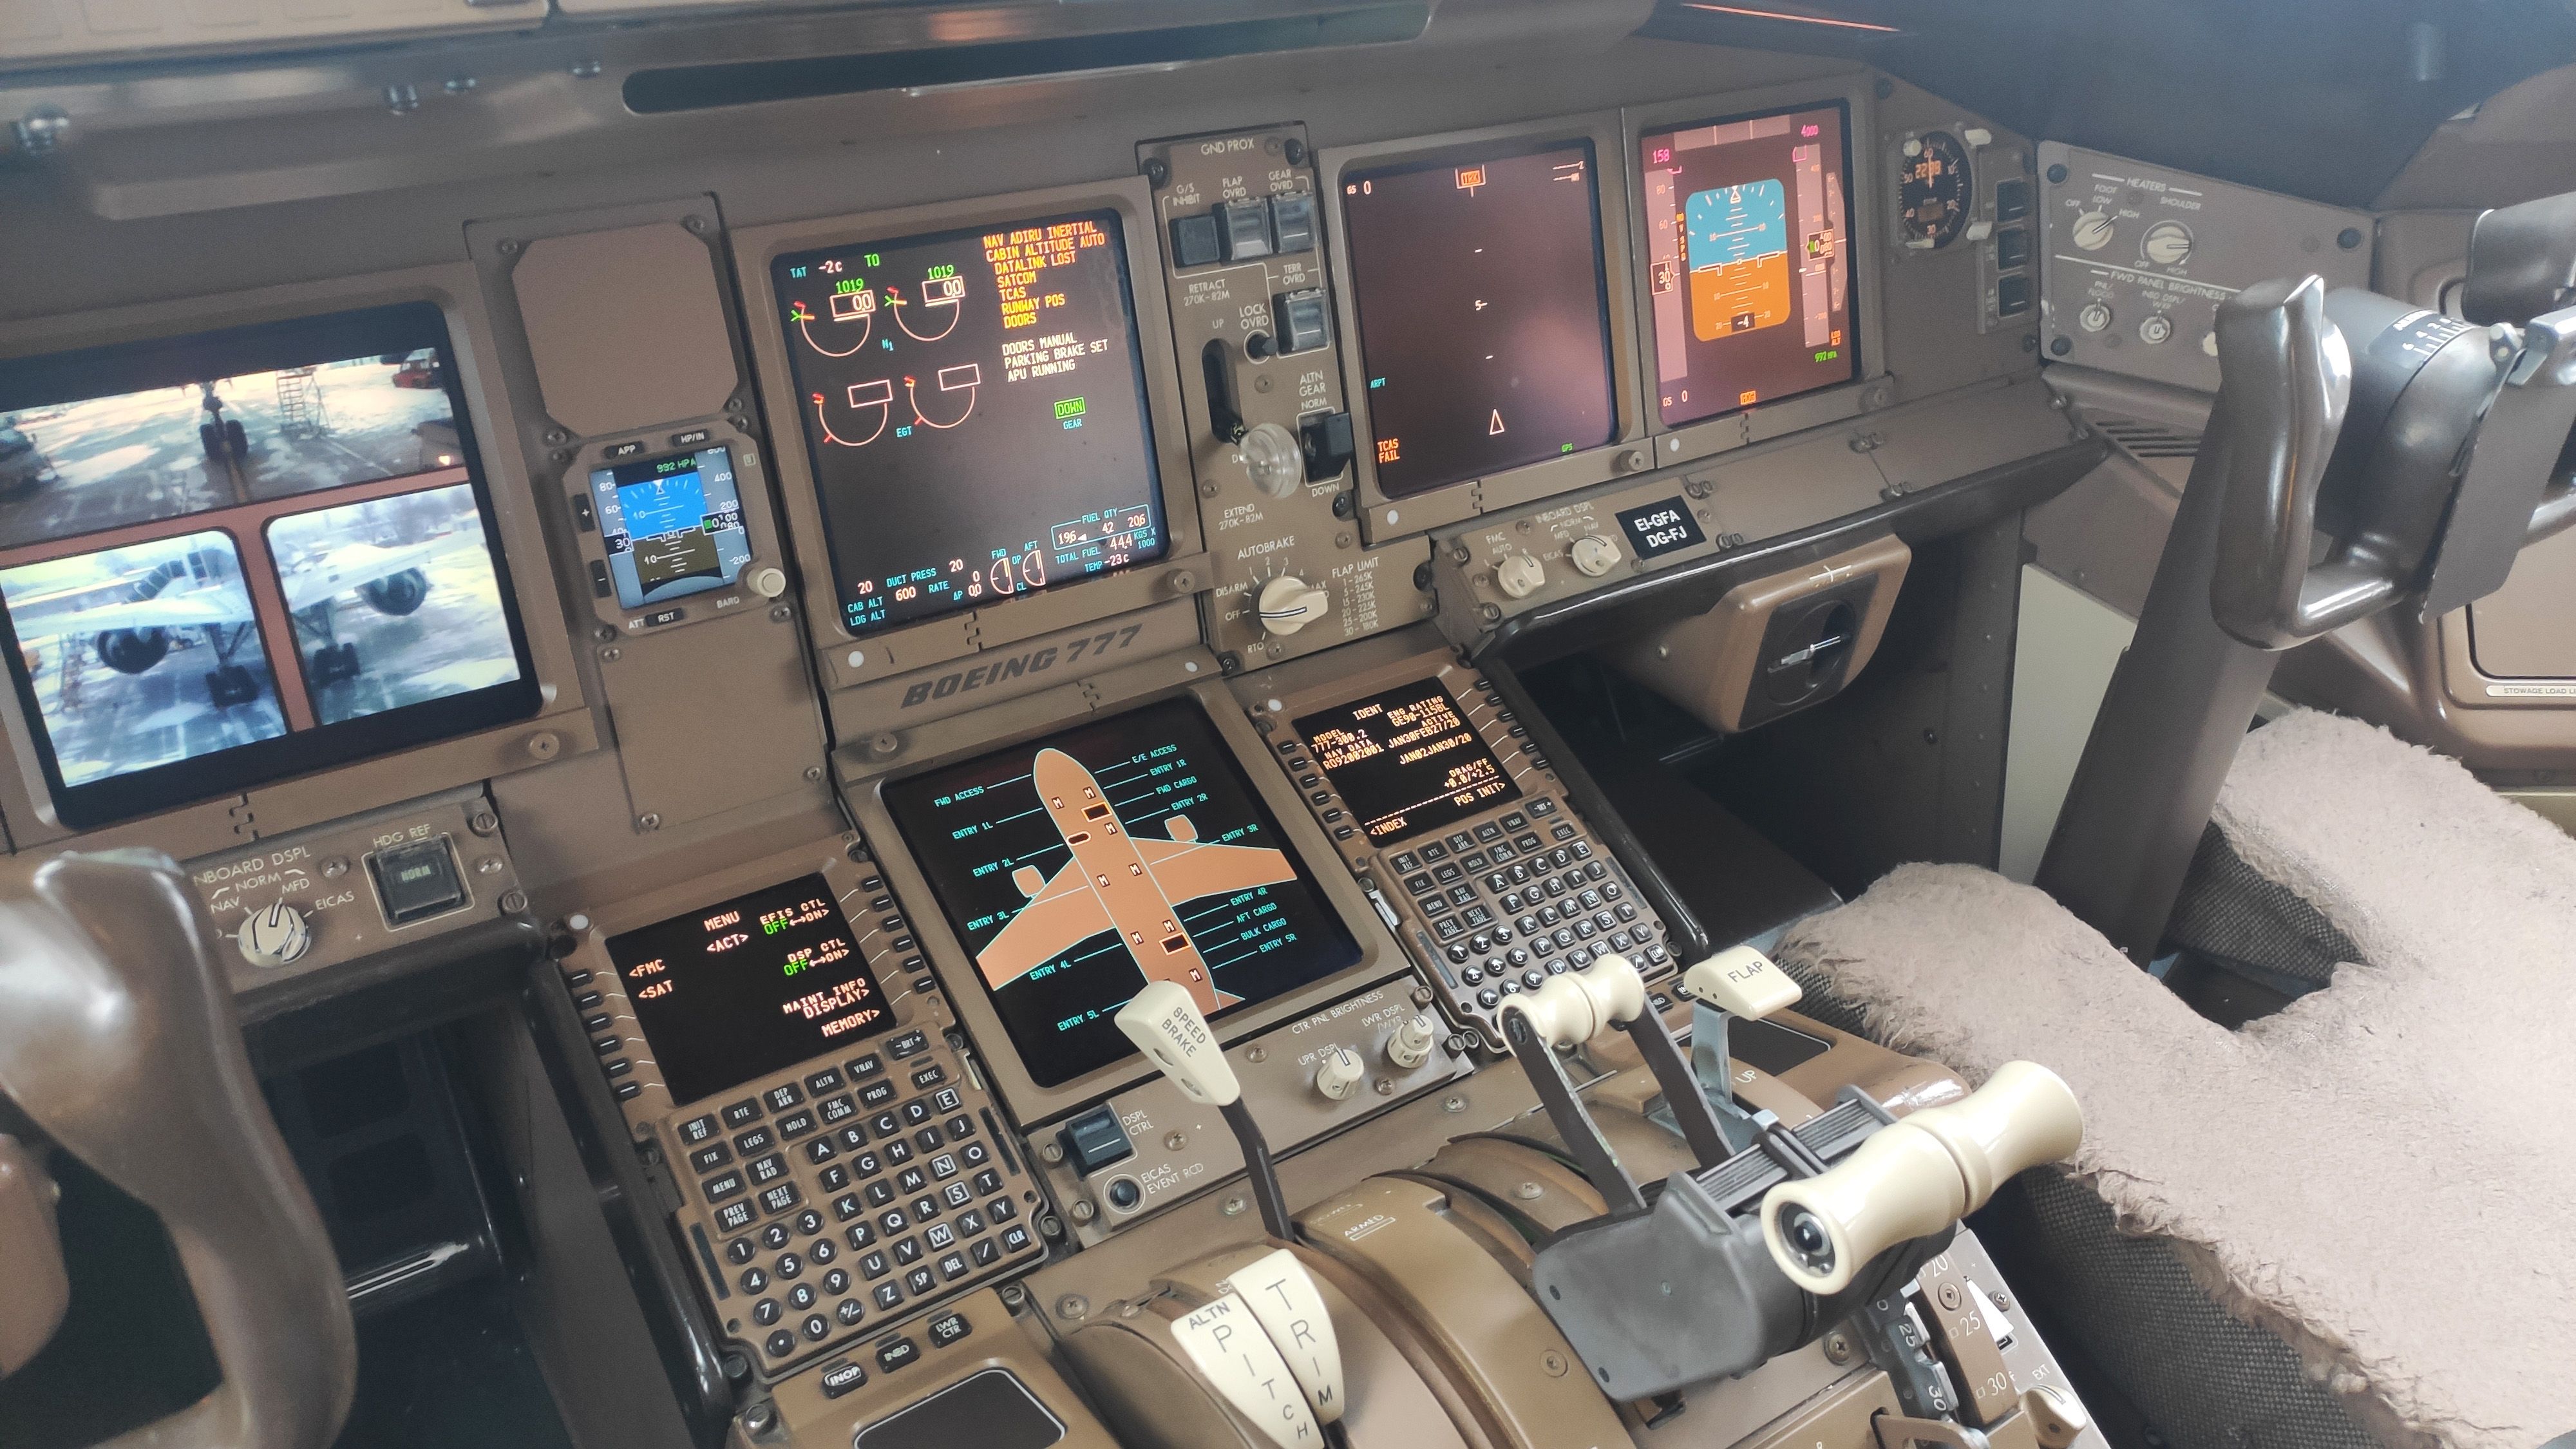 The EICAS and other flight displays on the Boeing 777.